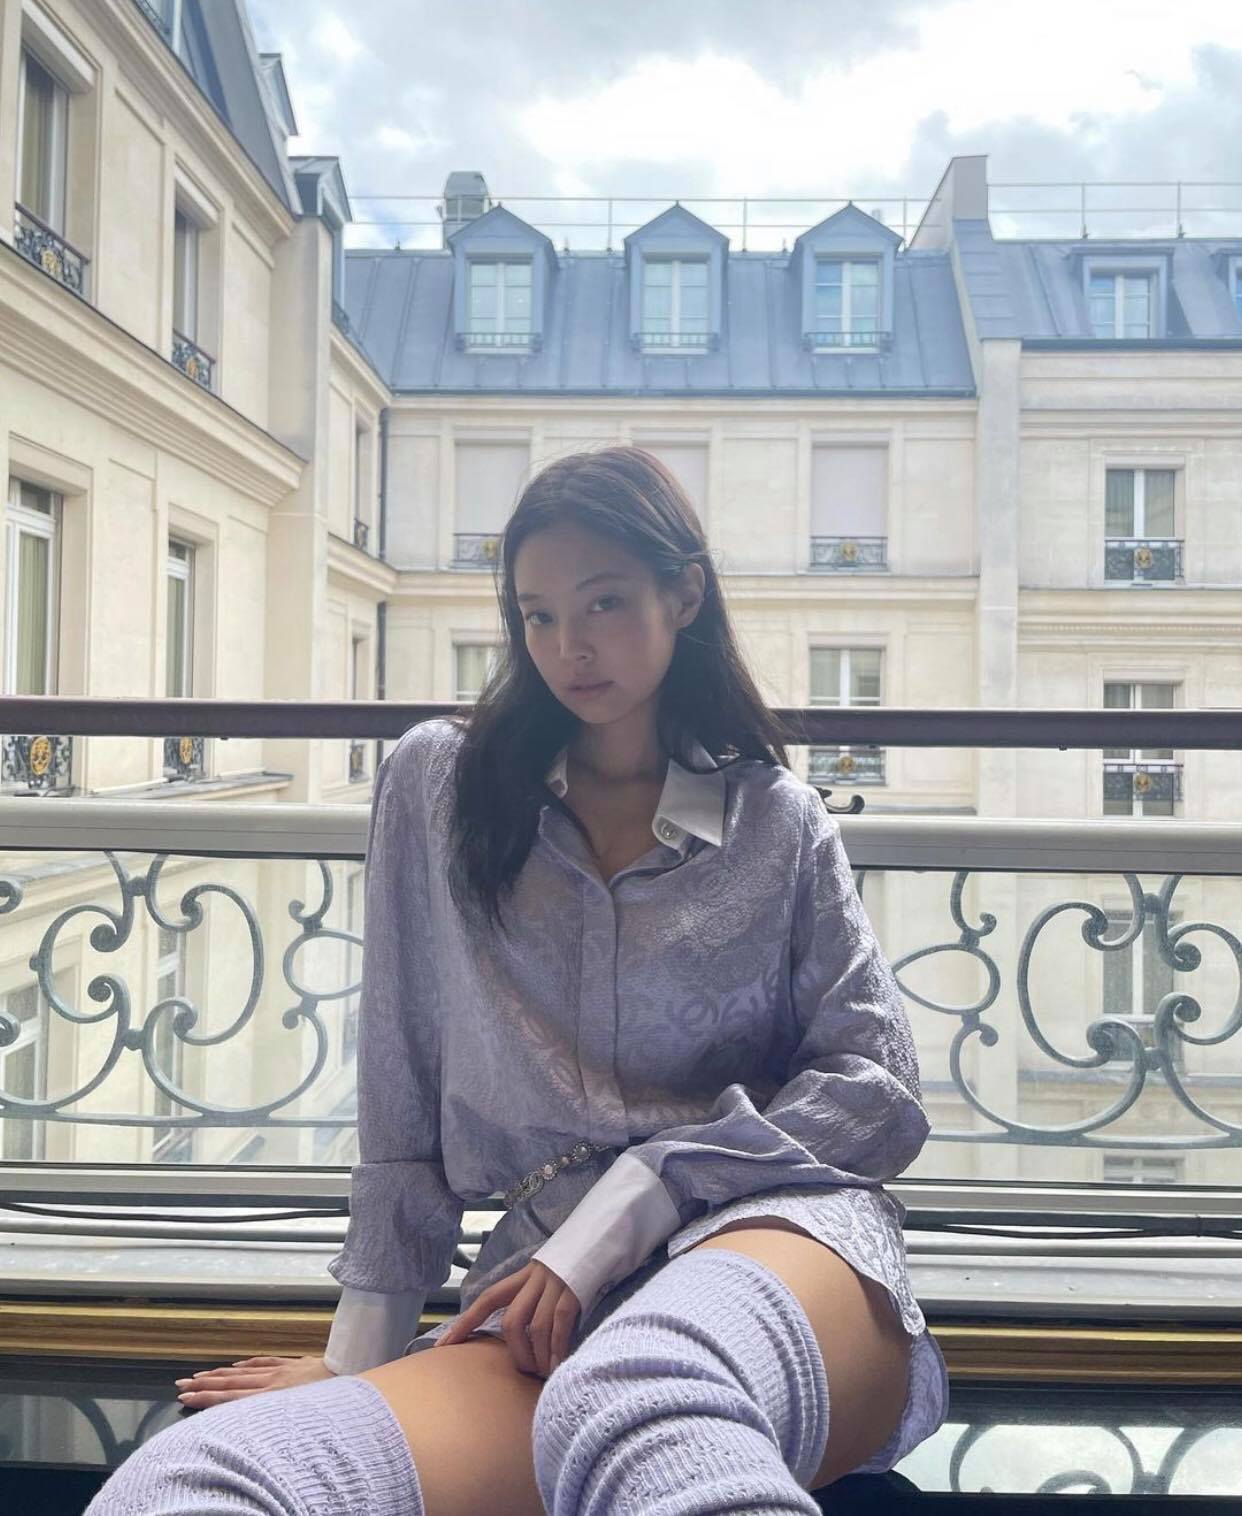 When she arrived in Paris, Jennie was completely naked, revealing a kind of ... confused: after showing pictures of hiding dangerous pants, she now wears a bra to go out - Photo 6.